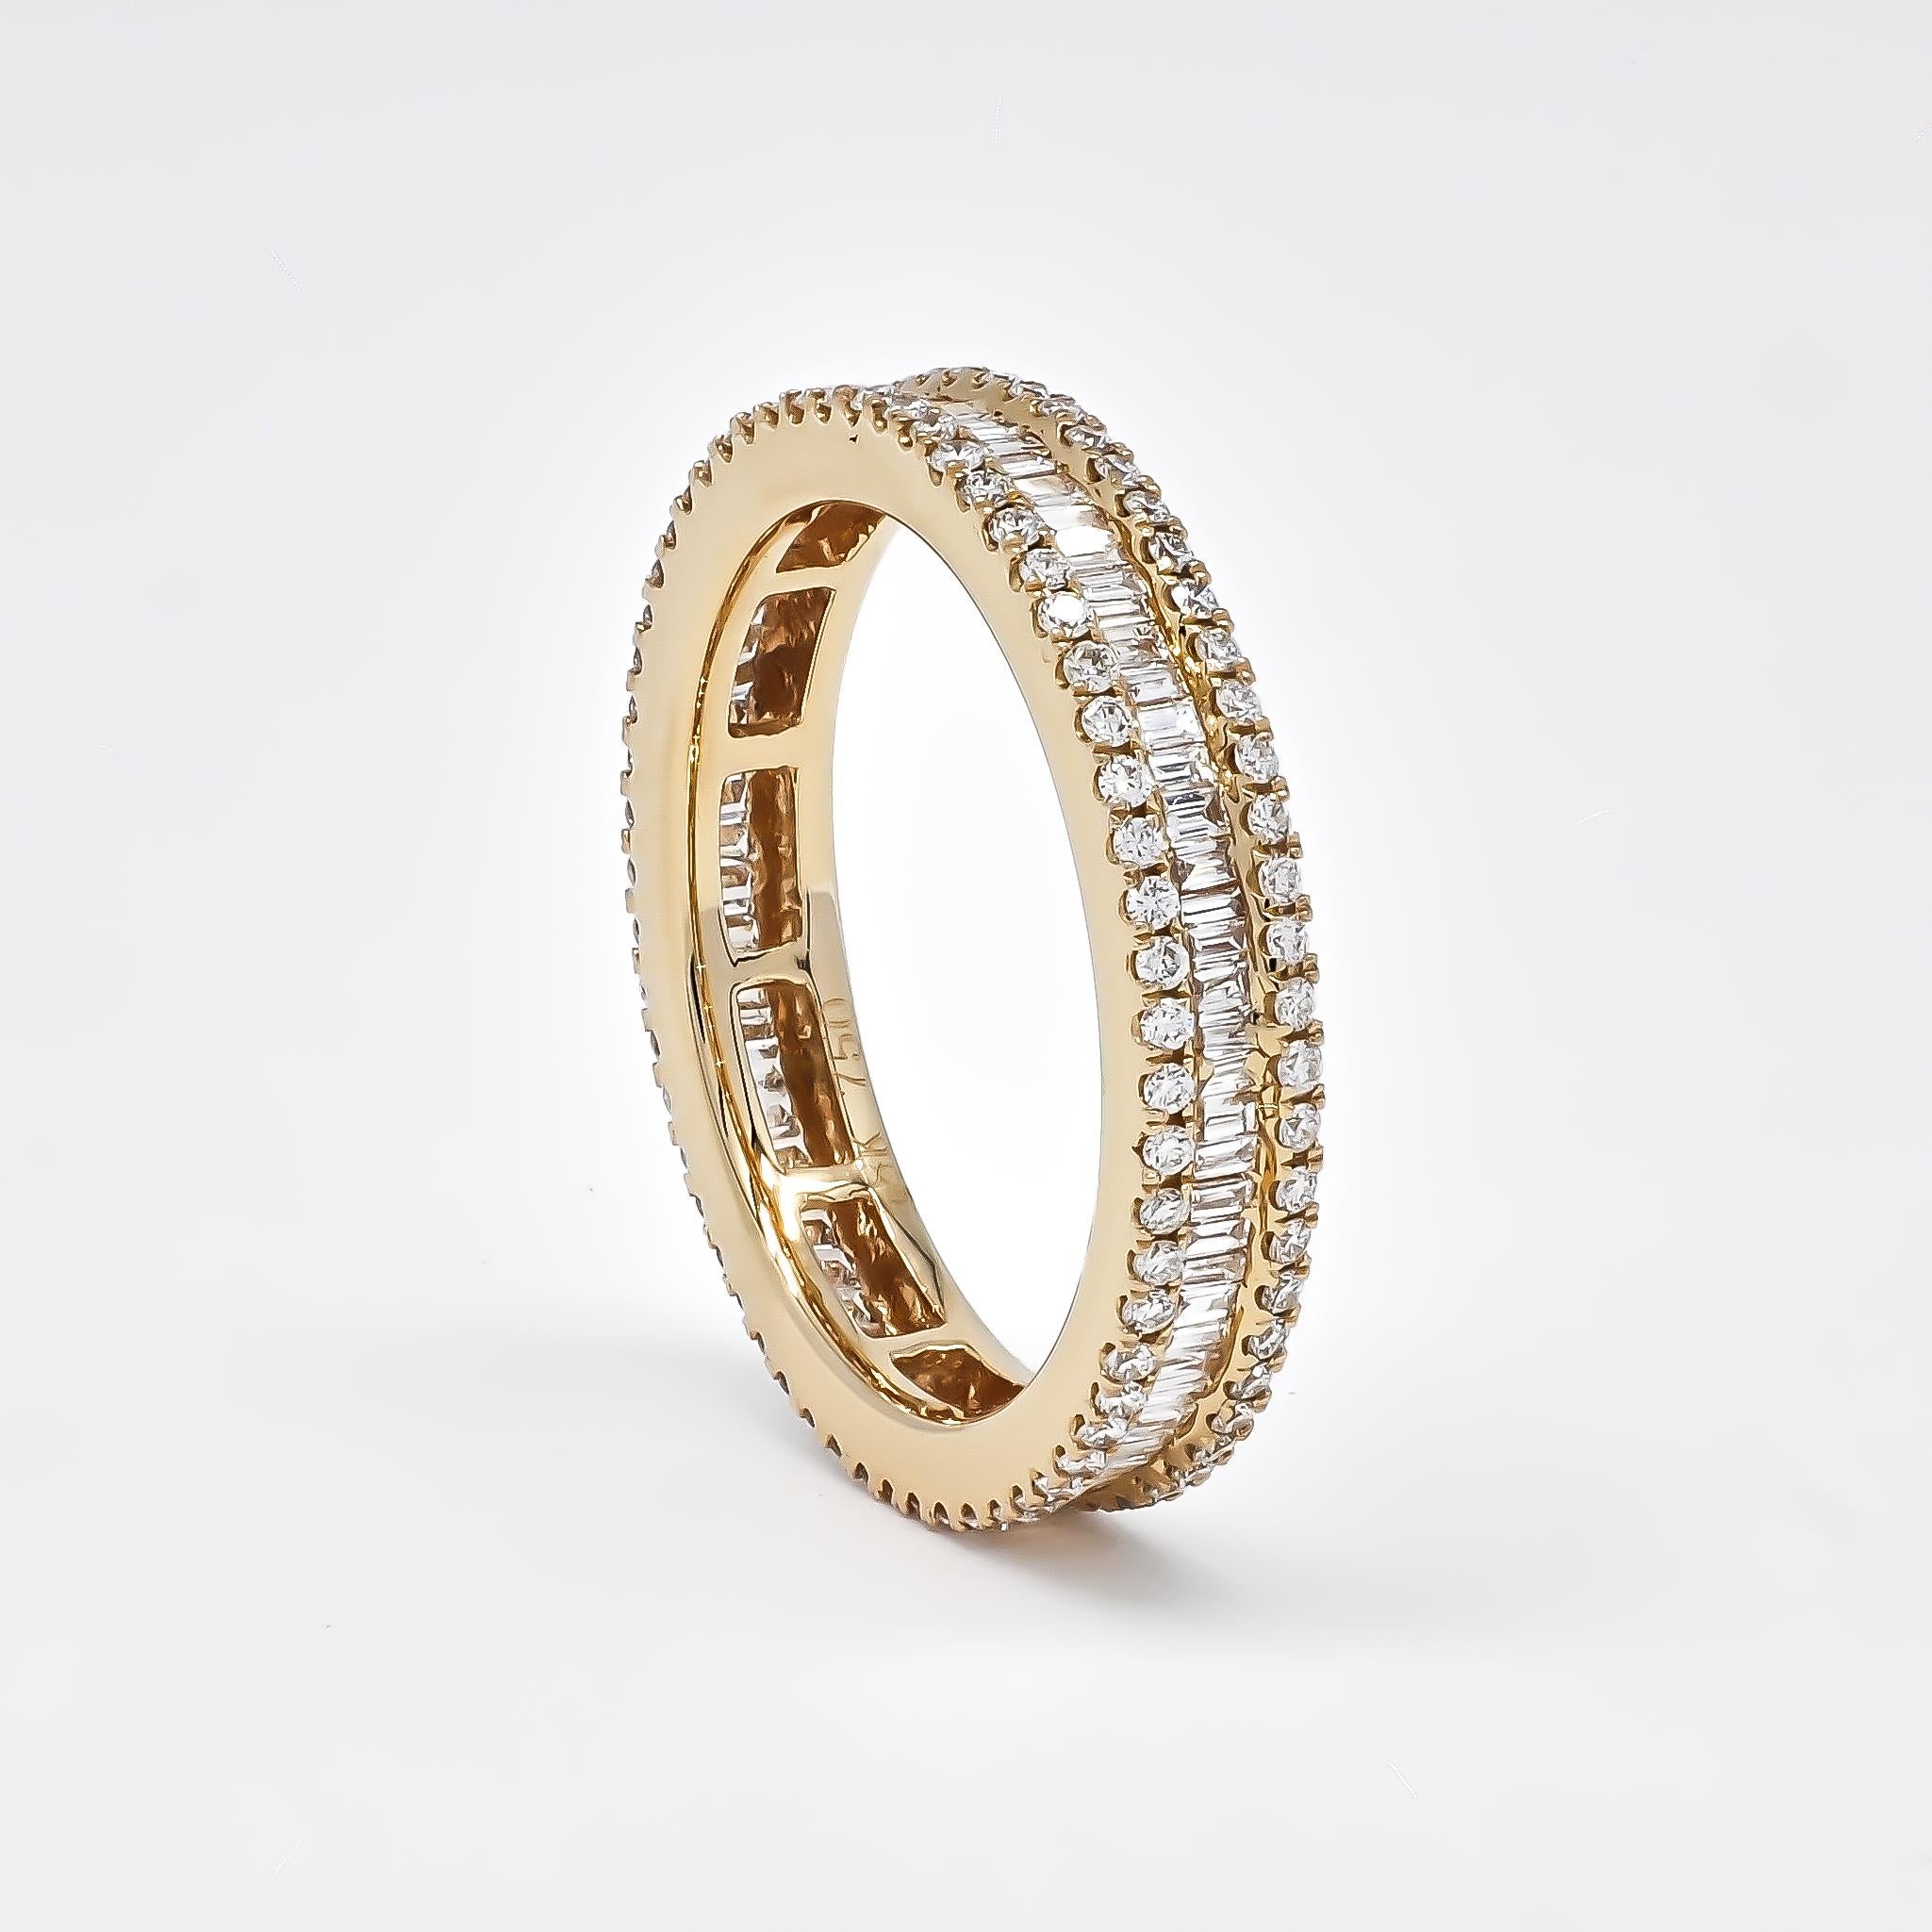 
A modern masterpiece, this striking band features brilliant baguettes bordered by stunning round-shape diamonds.

An elegant row of baguette diamonds gleams brightly amidst two rows of round-shape diamonds in this extraordinary band. When set in a